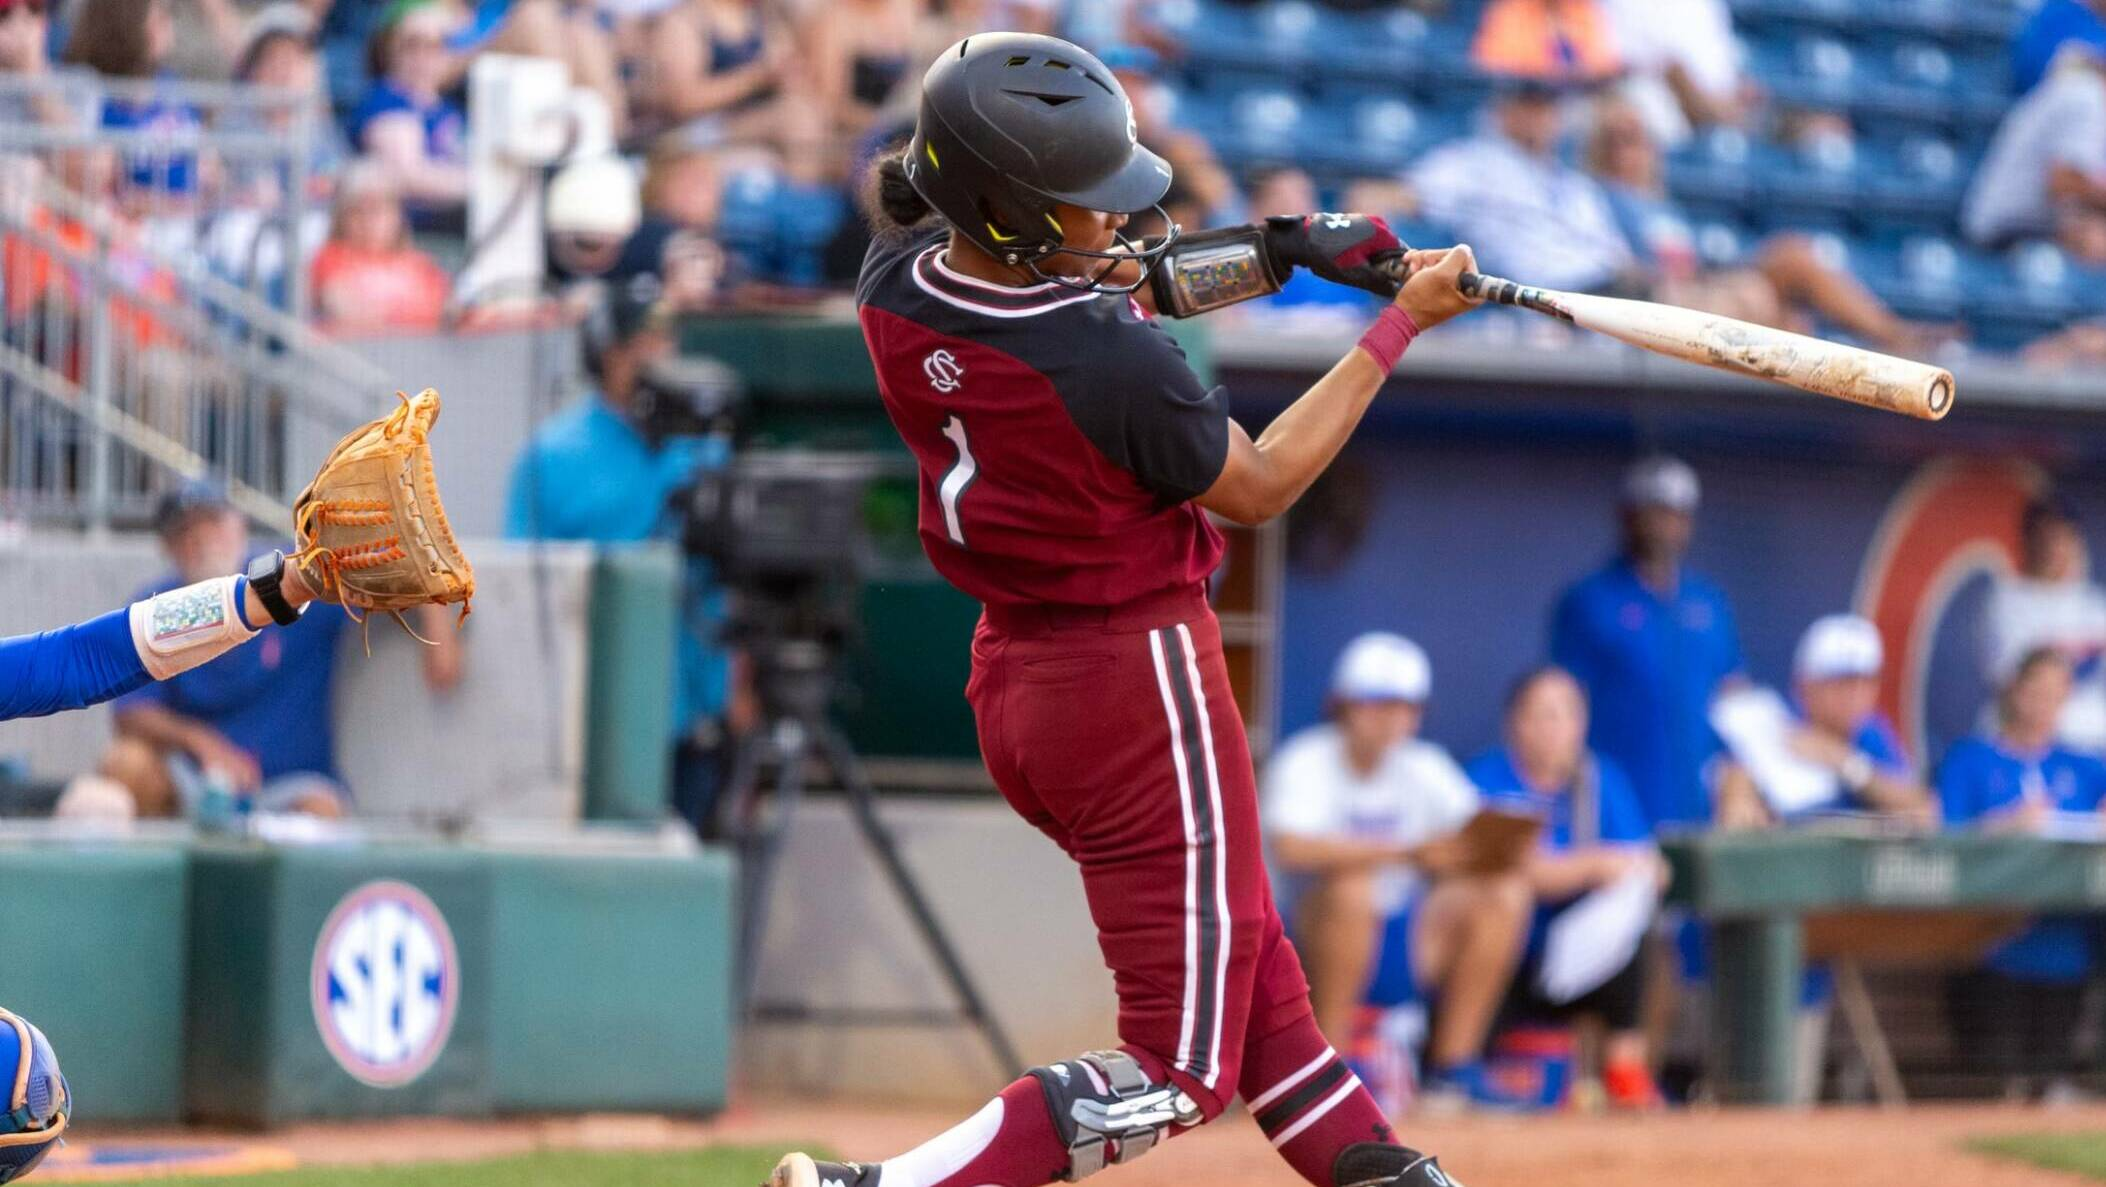 Gamecocks Out-Hit No. 10 Gators in Loss